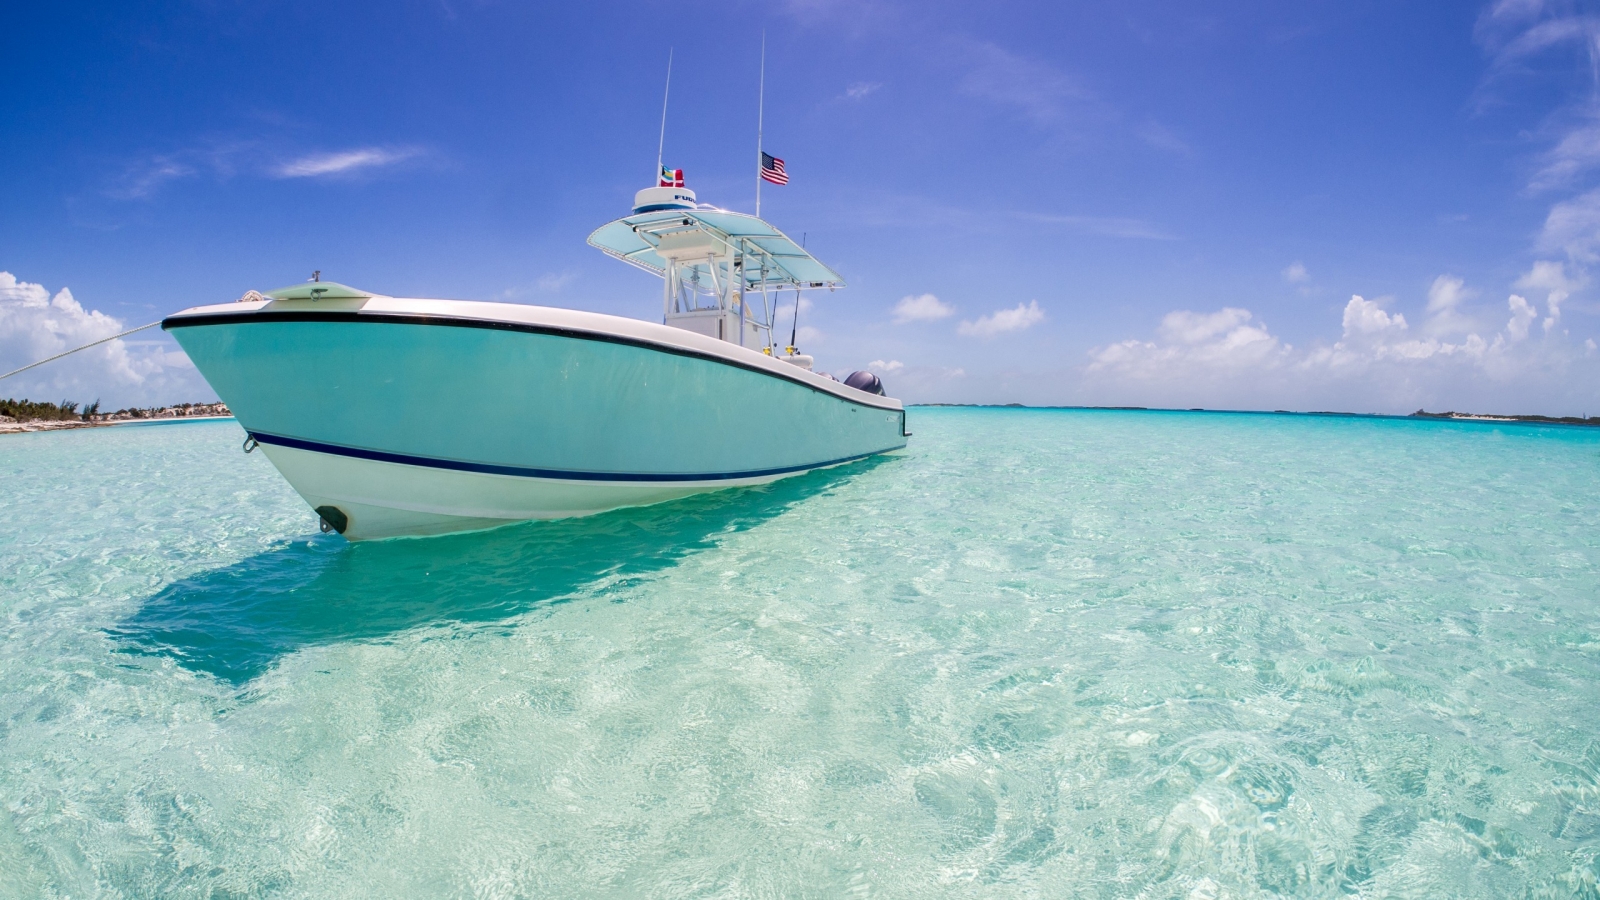 Boat in Paradise for 1600 x 900 HDTV resolution